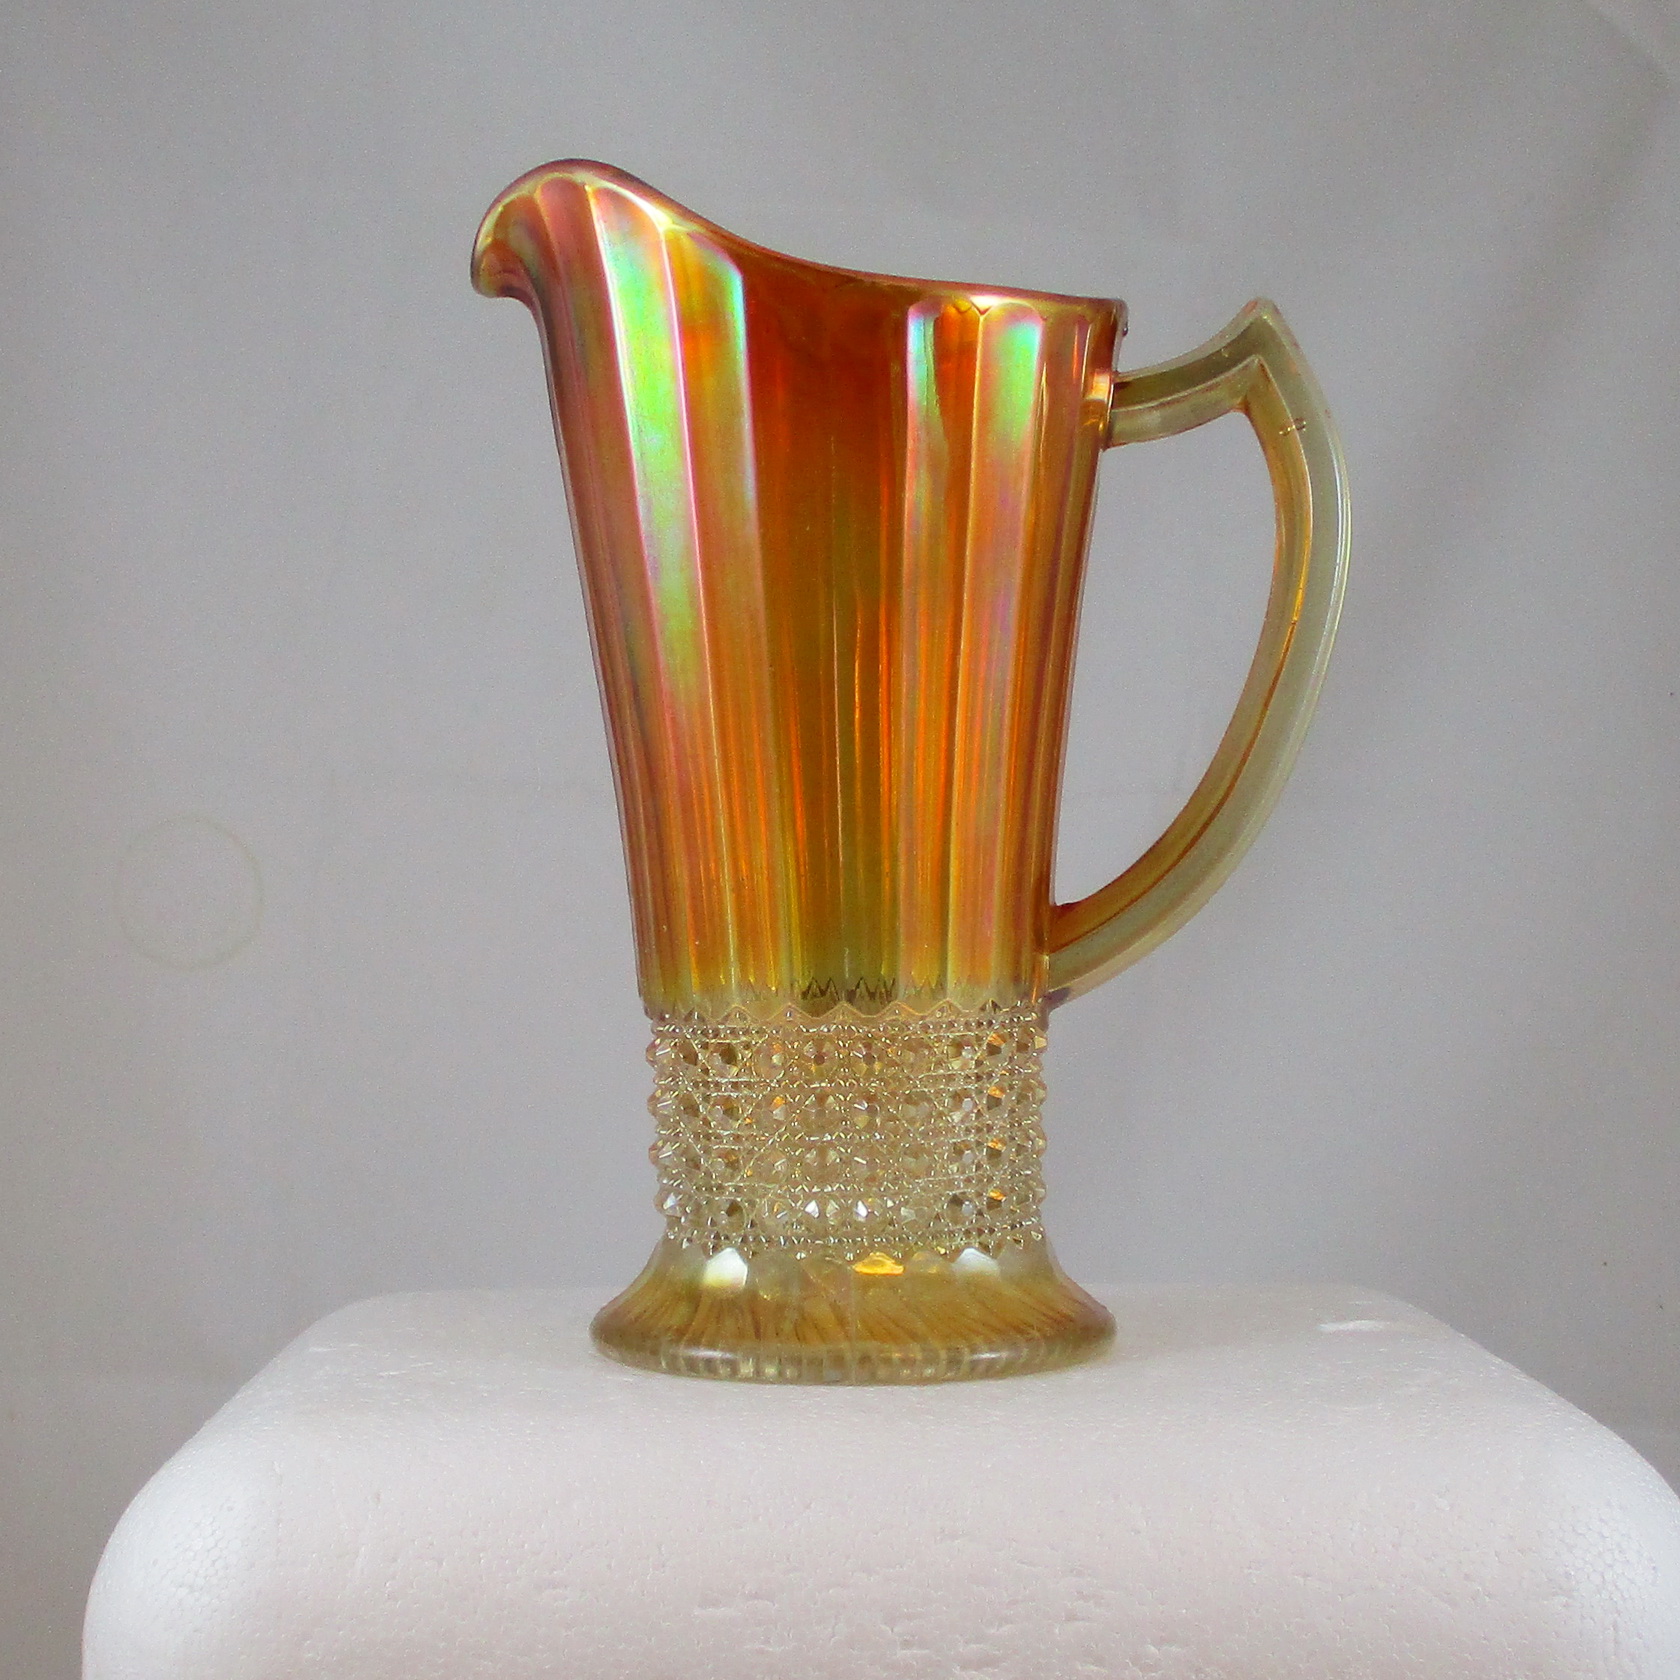 Antique Imperial Marigold Flute And Cane Carnival Glass Pitcher Carnival Glass